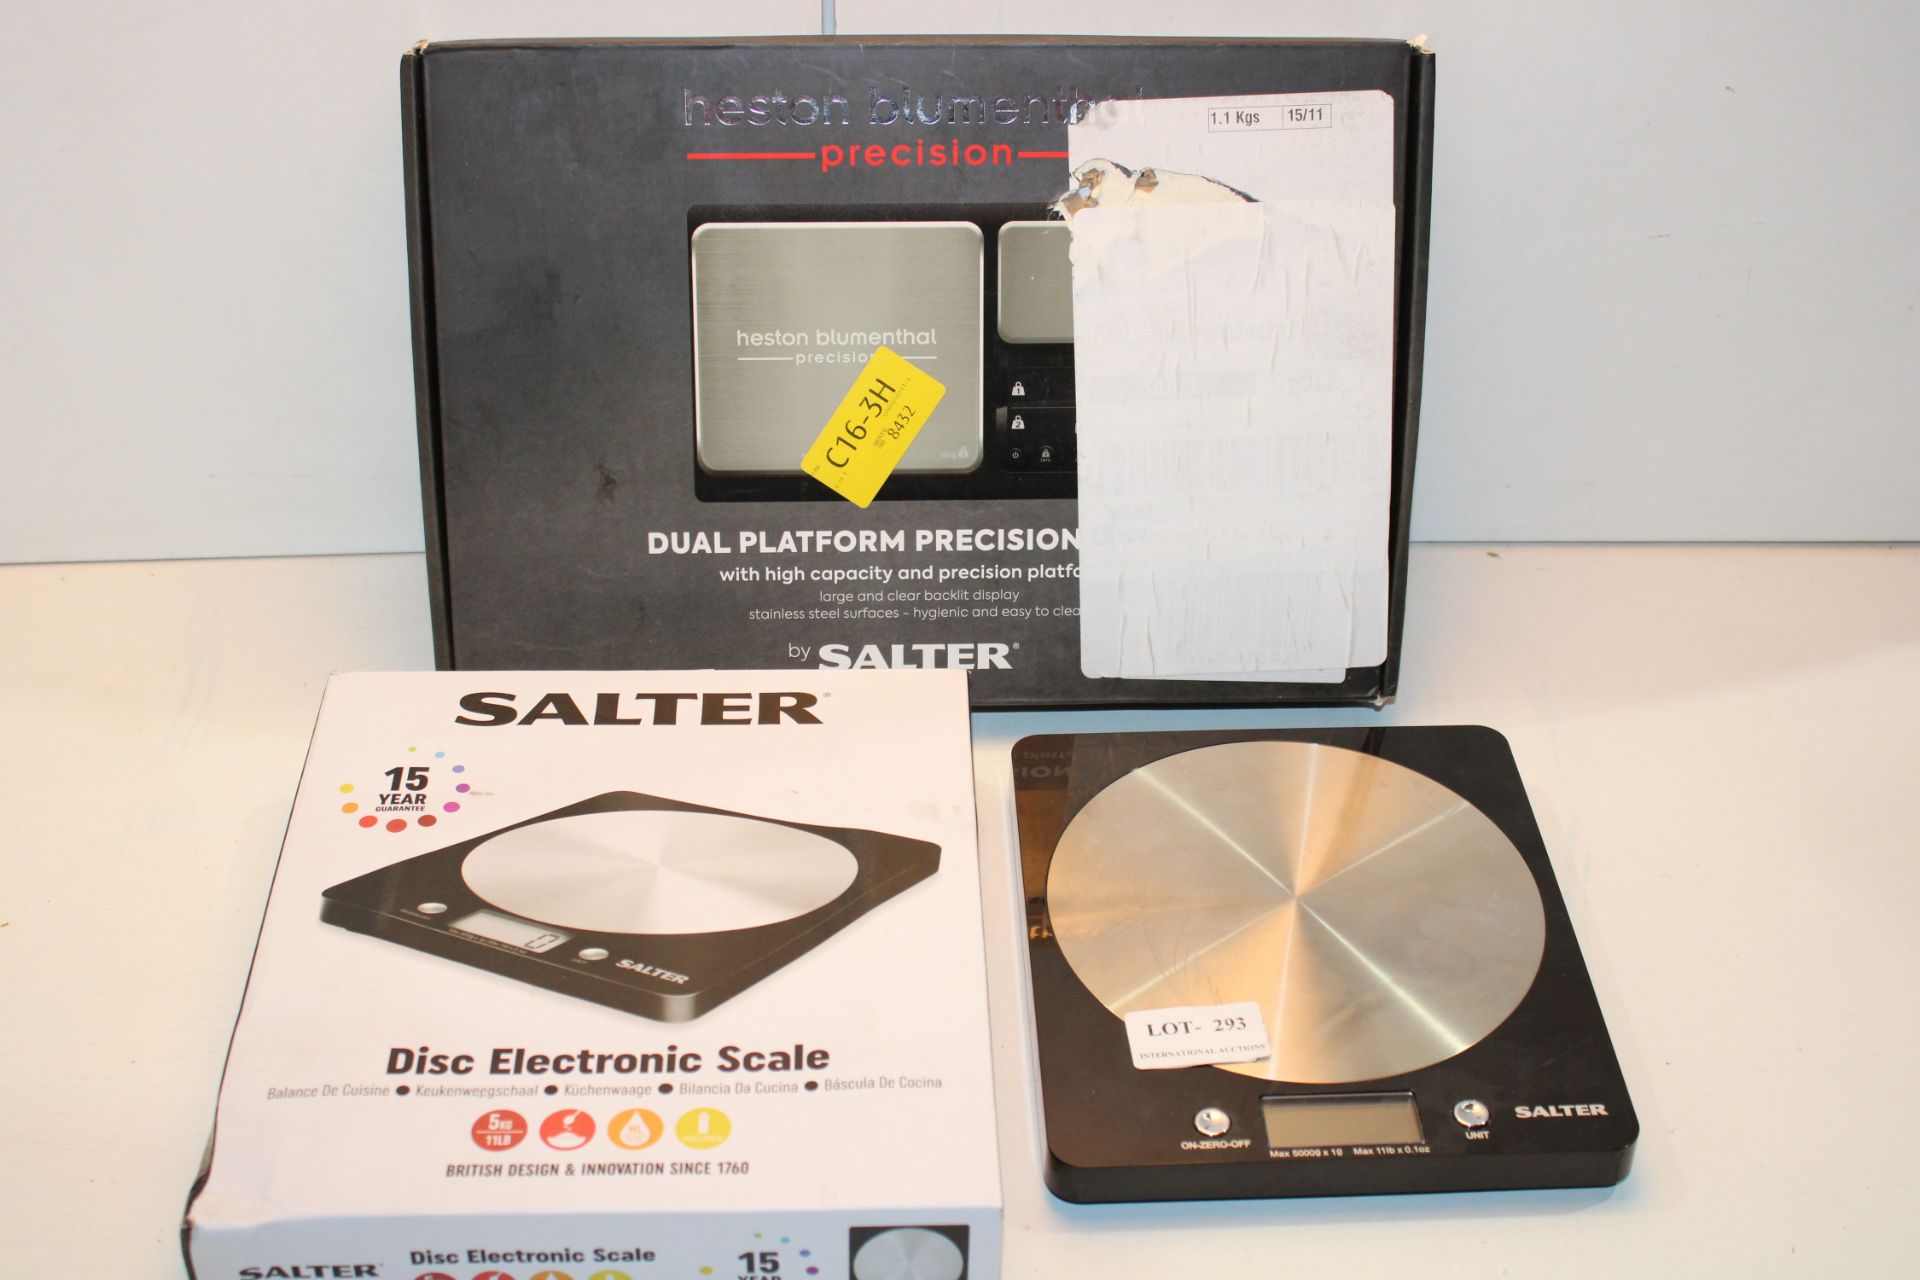 3X BOXED/UNBOXED ASSORTED DIGITAL ELECT6ONIC SCALES Condition Report Appraisal Available on Request-